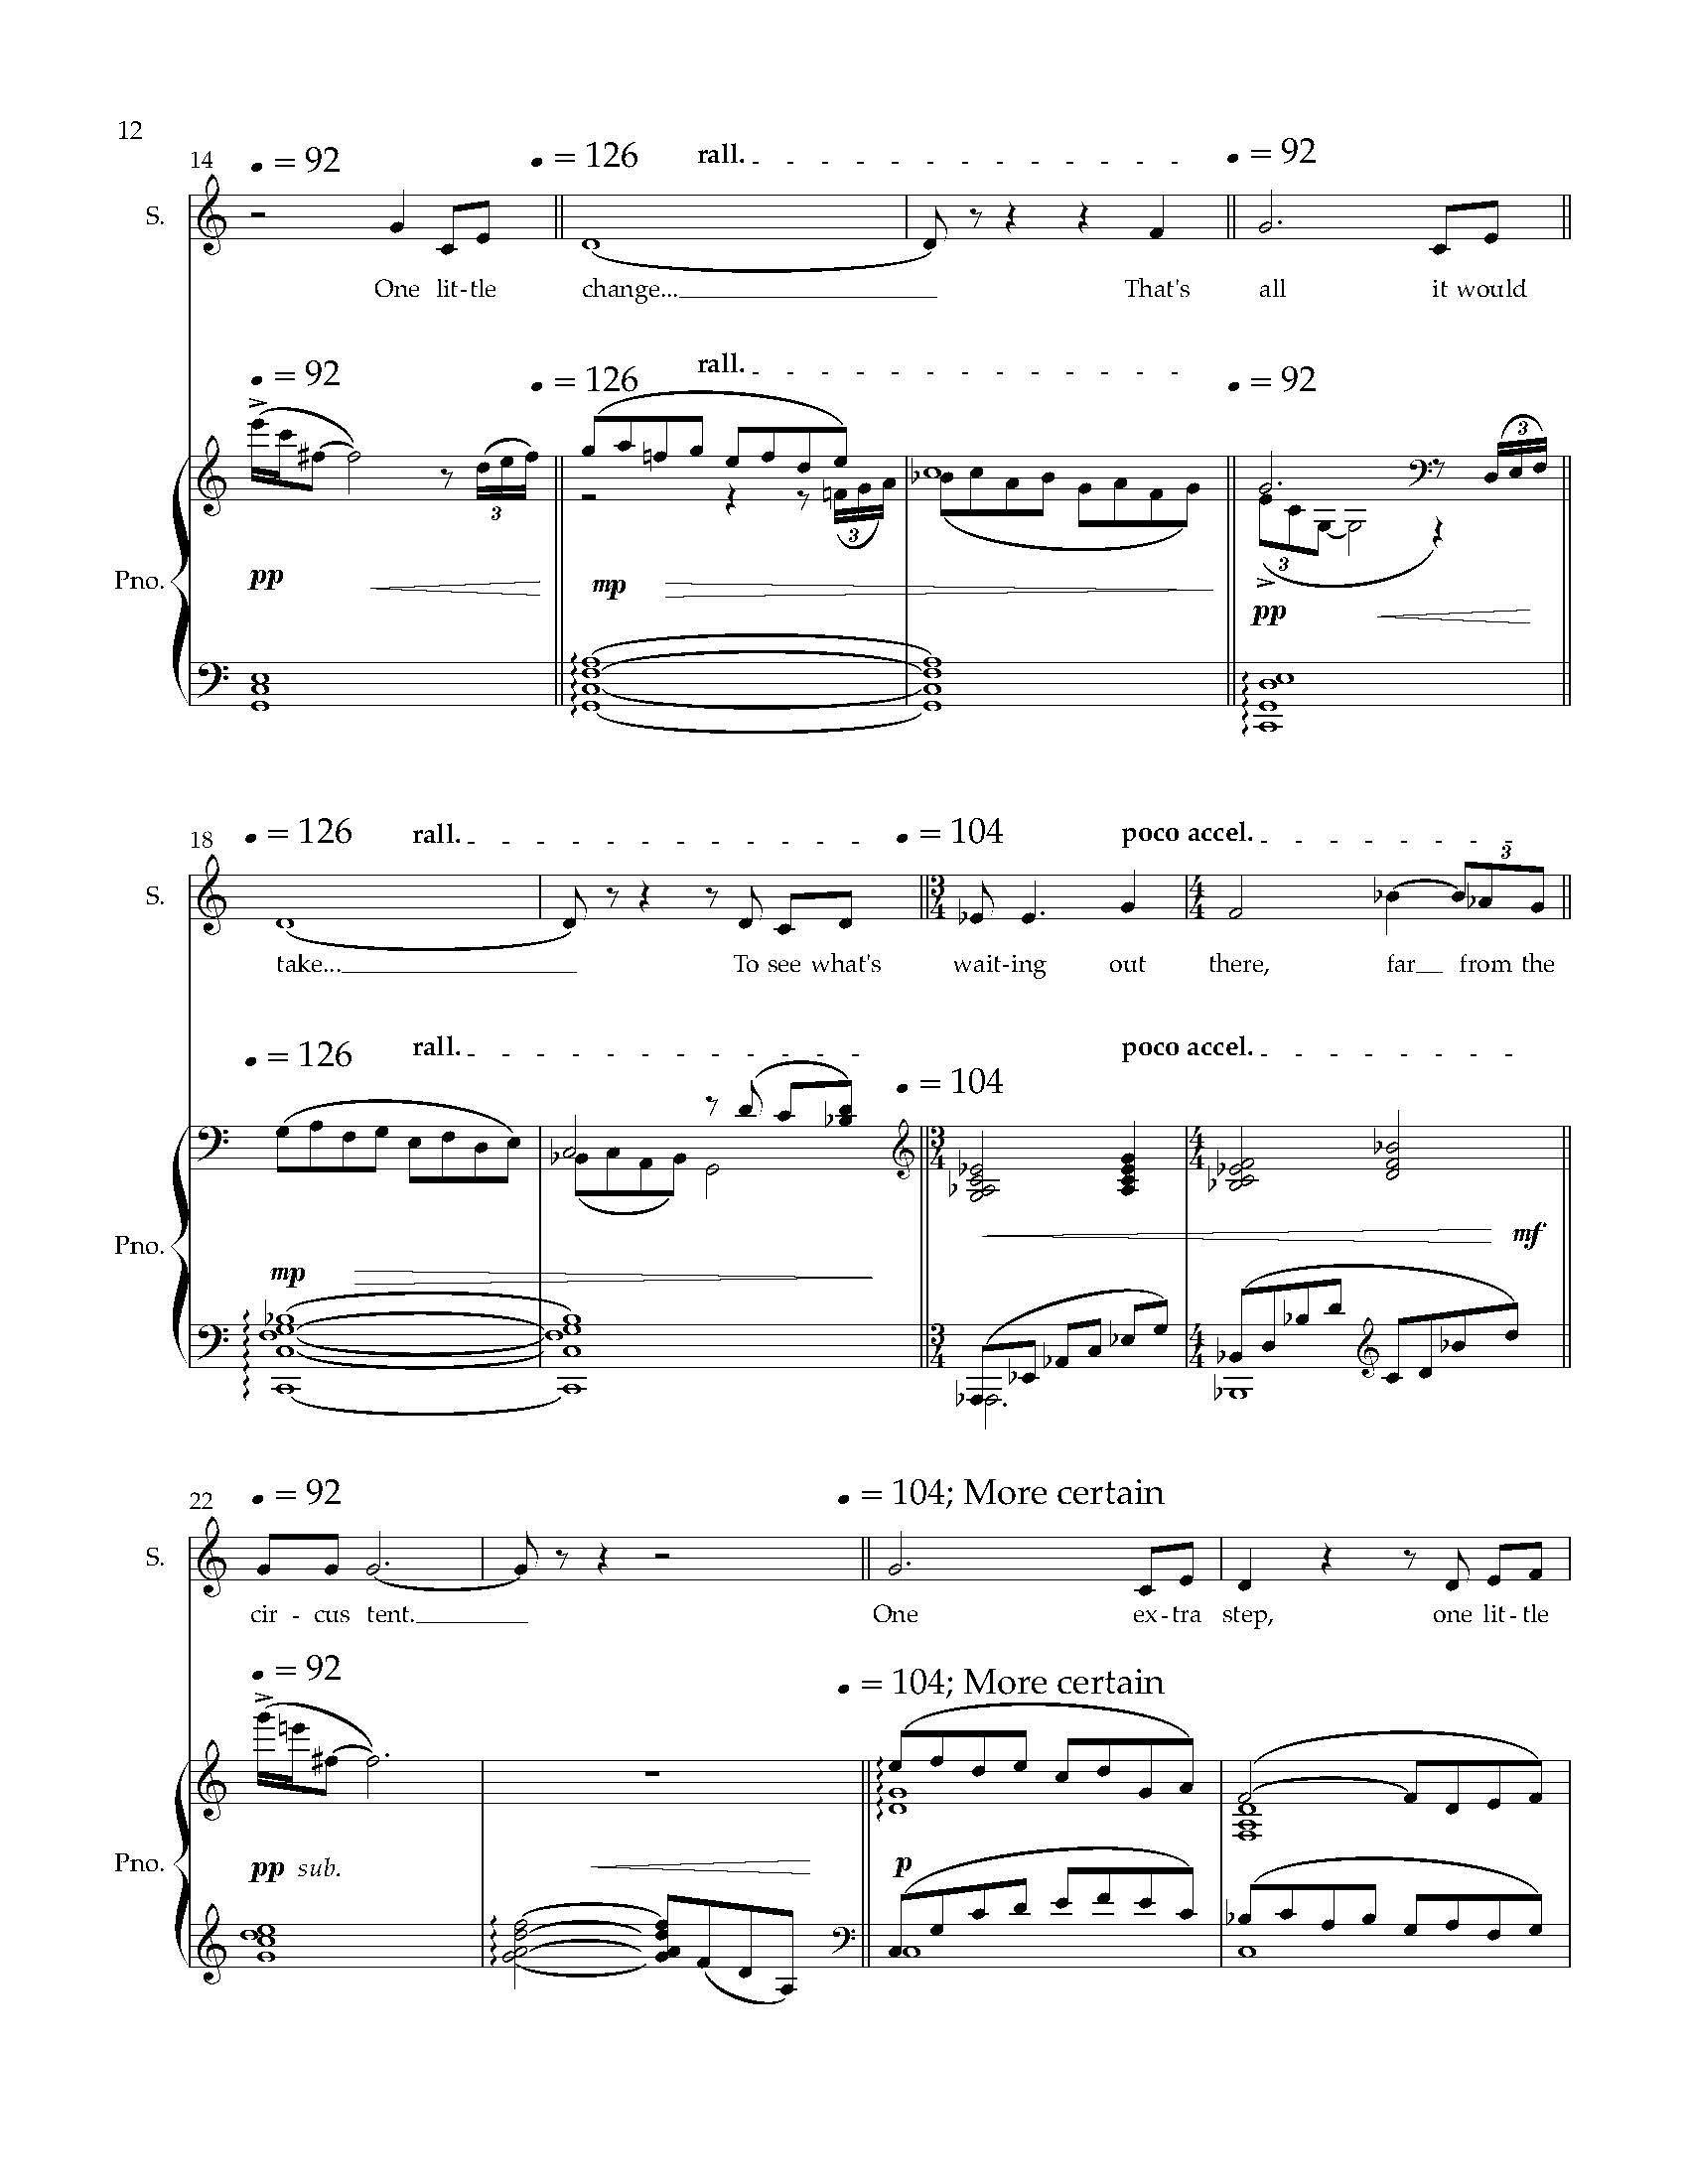 Five Arias from HWGS - Complete Score (1)_Page_16.jpg